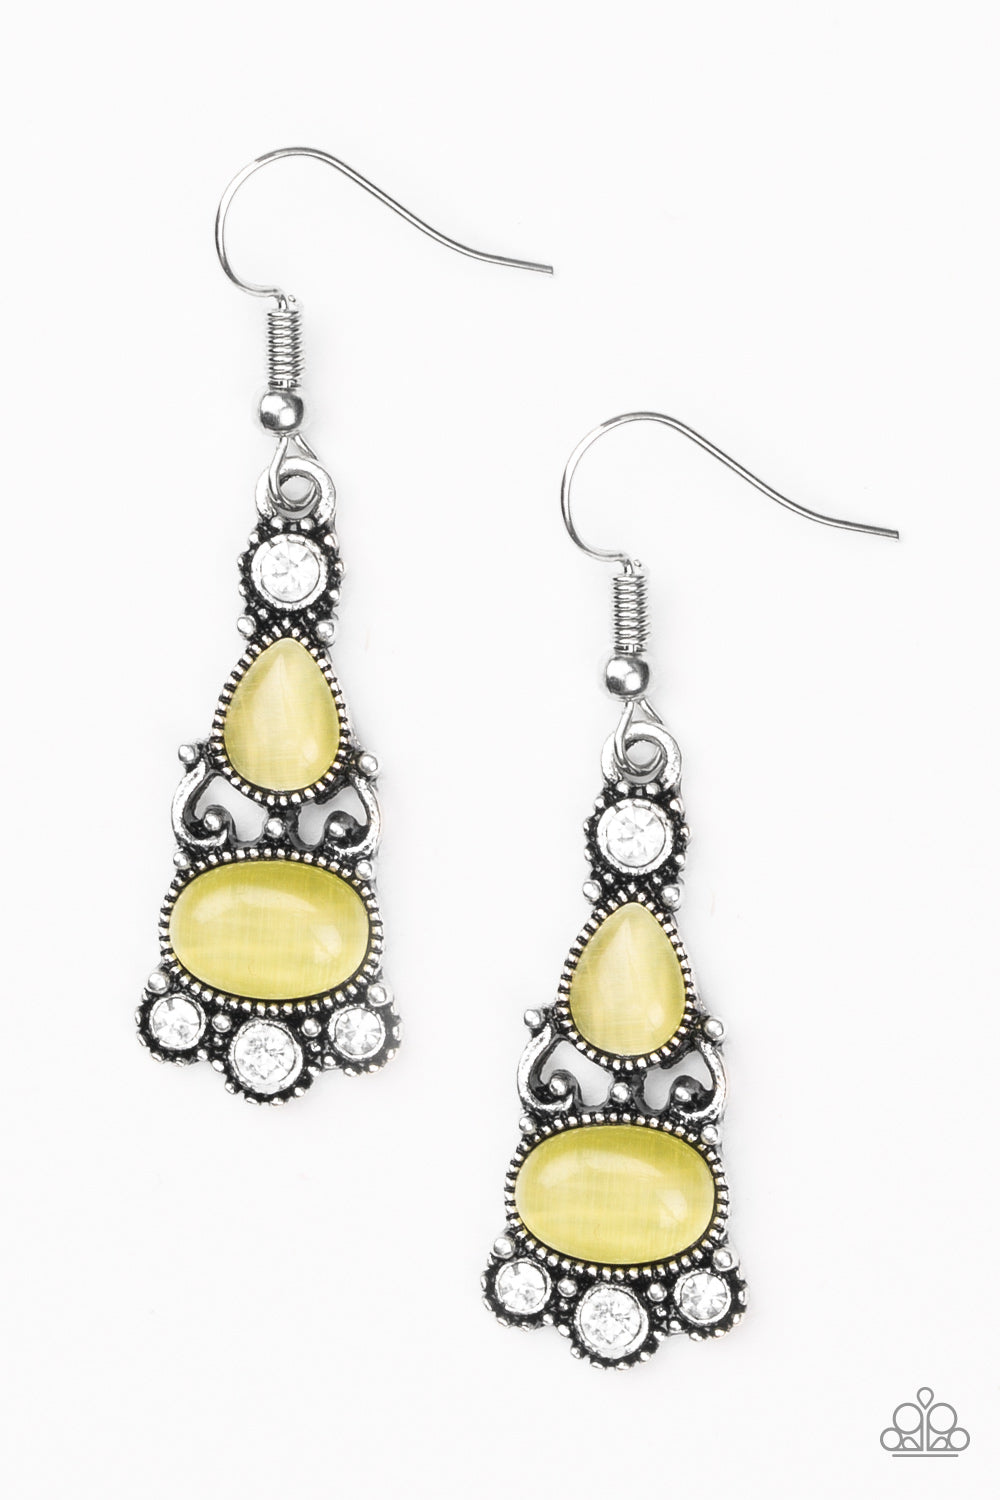 PUSH YOUR LUXE - YELLOW MOONSTONE DAINTY EARRINGS